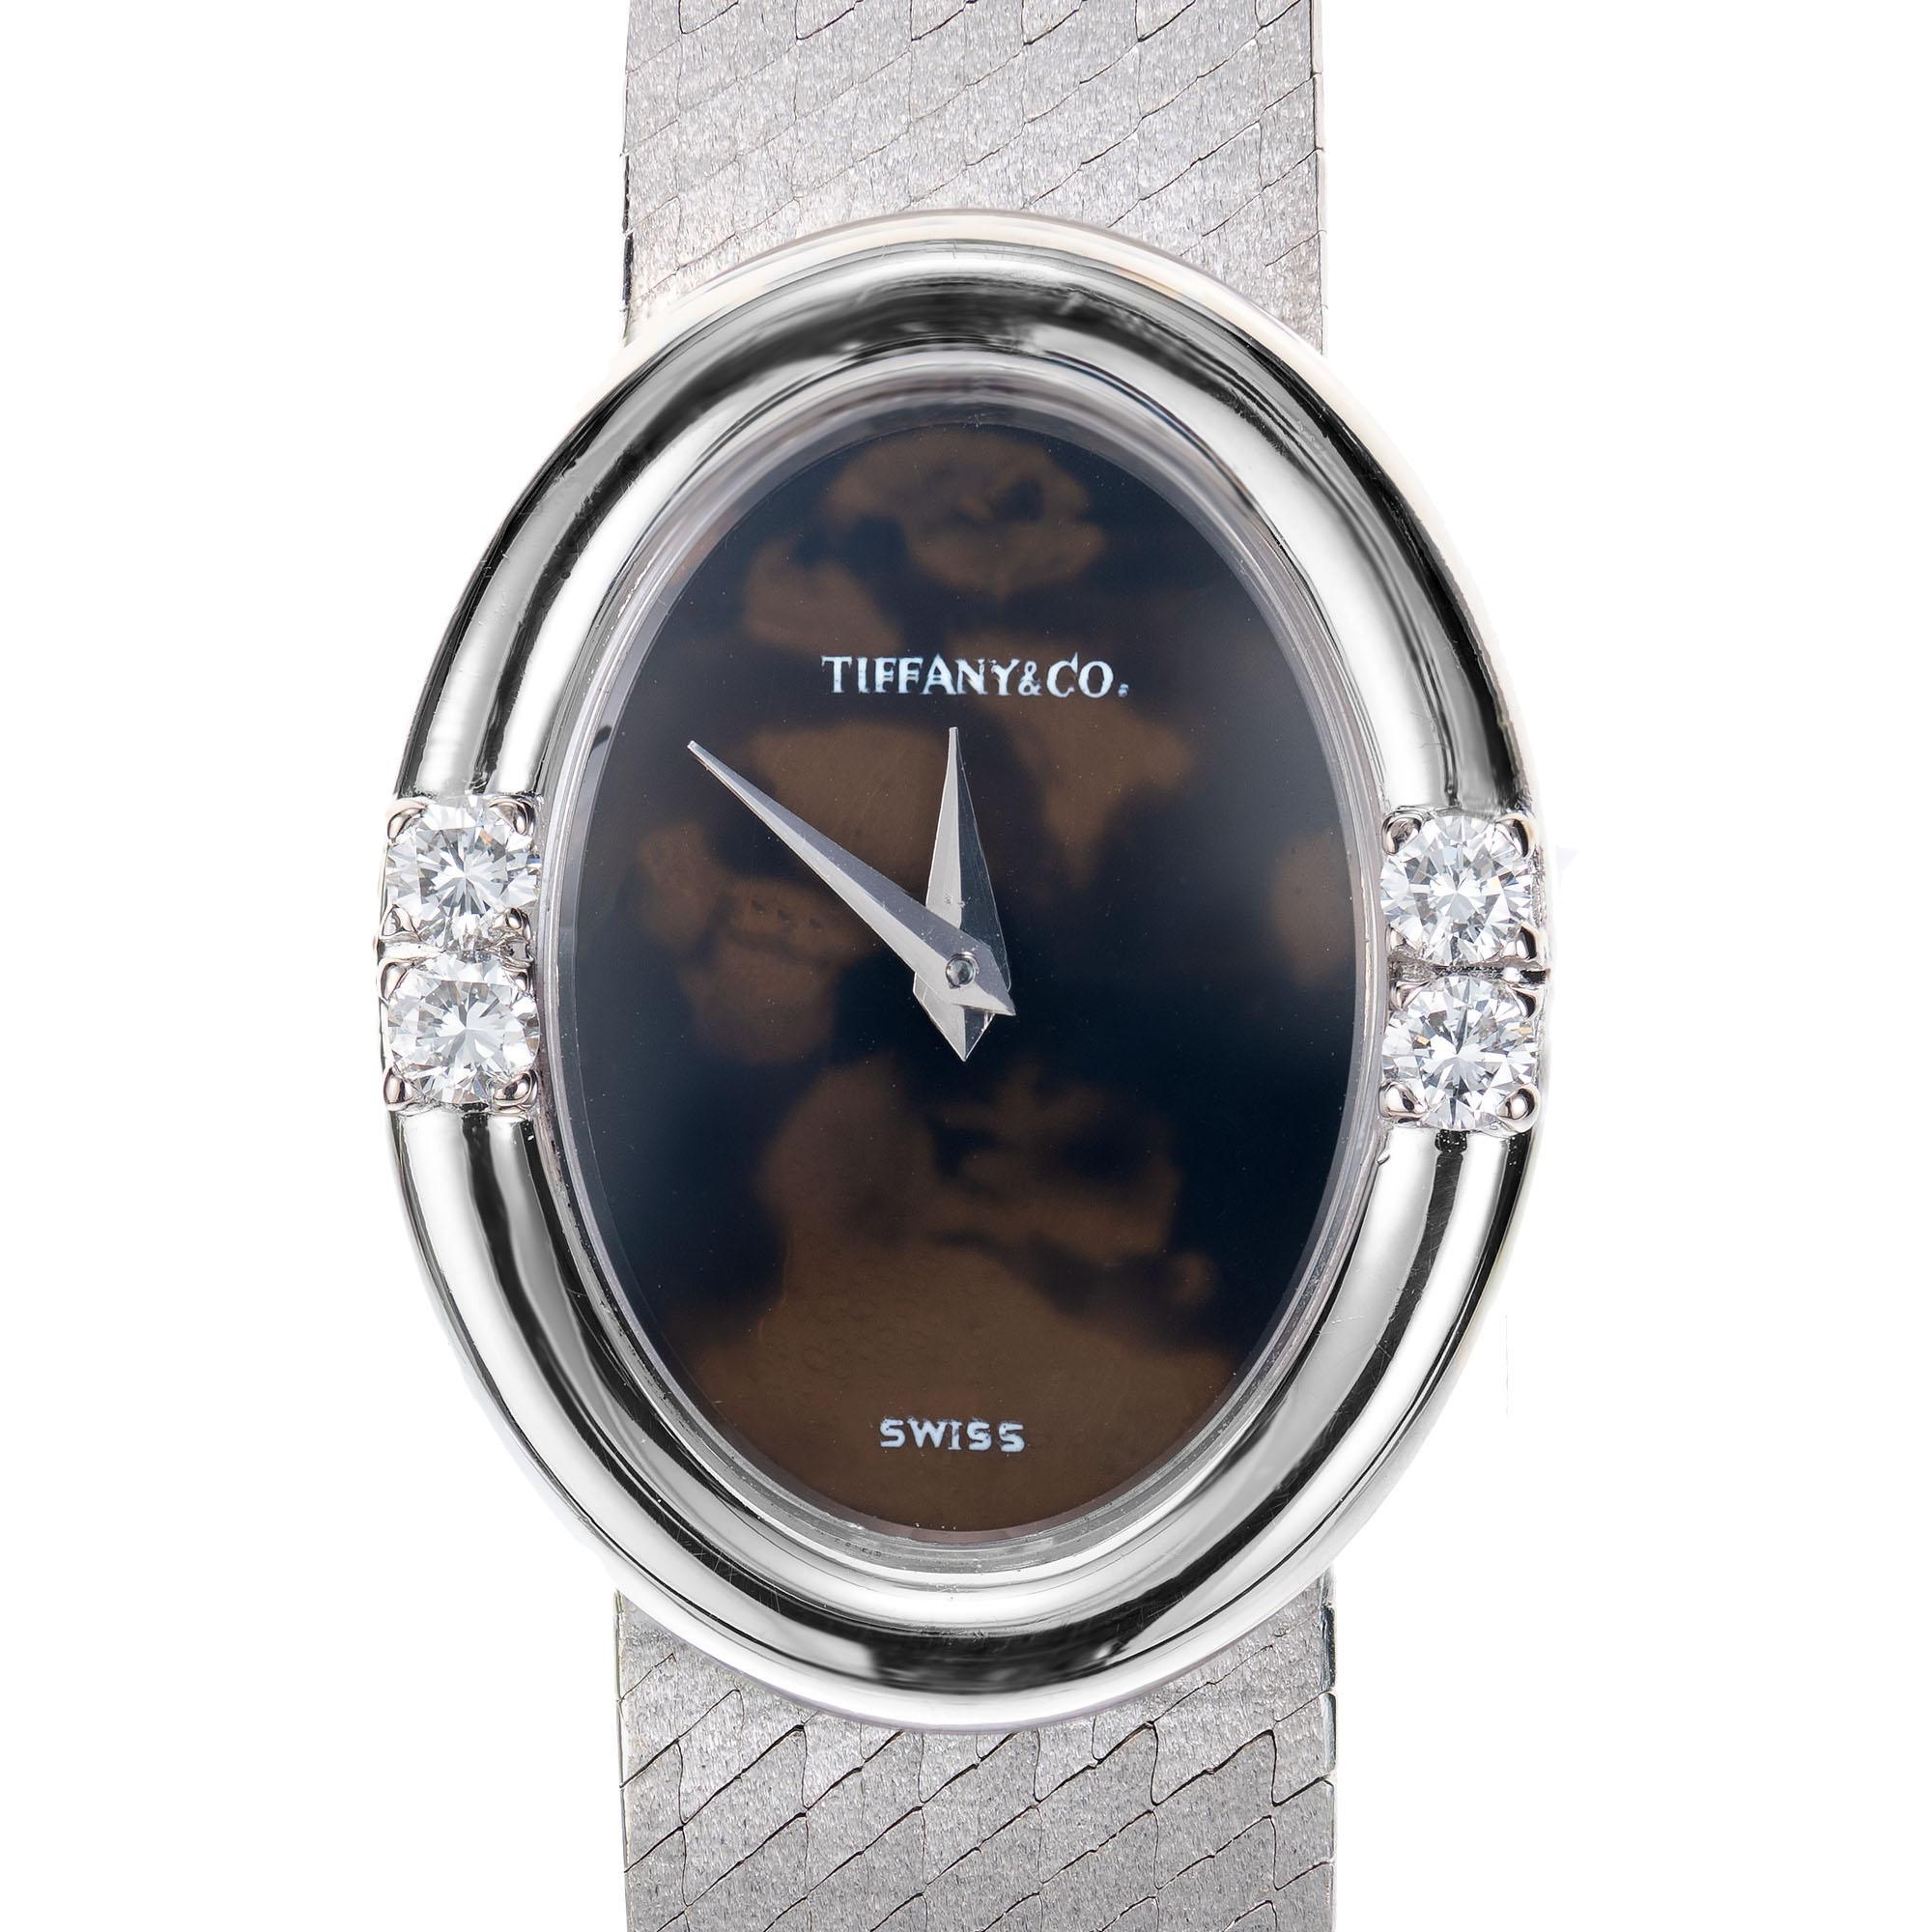 Tiffany & Co. Agate oval dial wristwatch. 18k white gold mesh band. Manual wind and Chopard movement. 7 inches long. 

Case Length: 25.16mm
Case Width: 19.54mm
Band width at case: 12mm
Case thickness: 7.93mm
Band: 18k white gold mesh
Crystal: